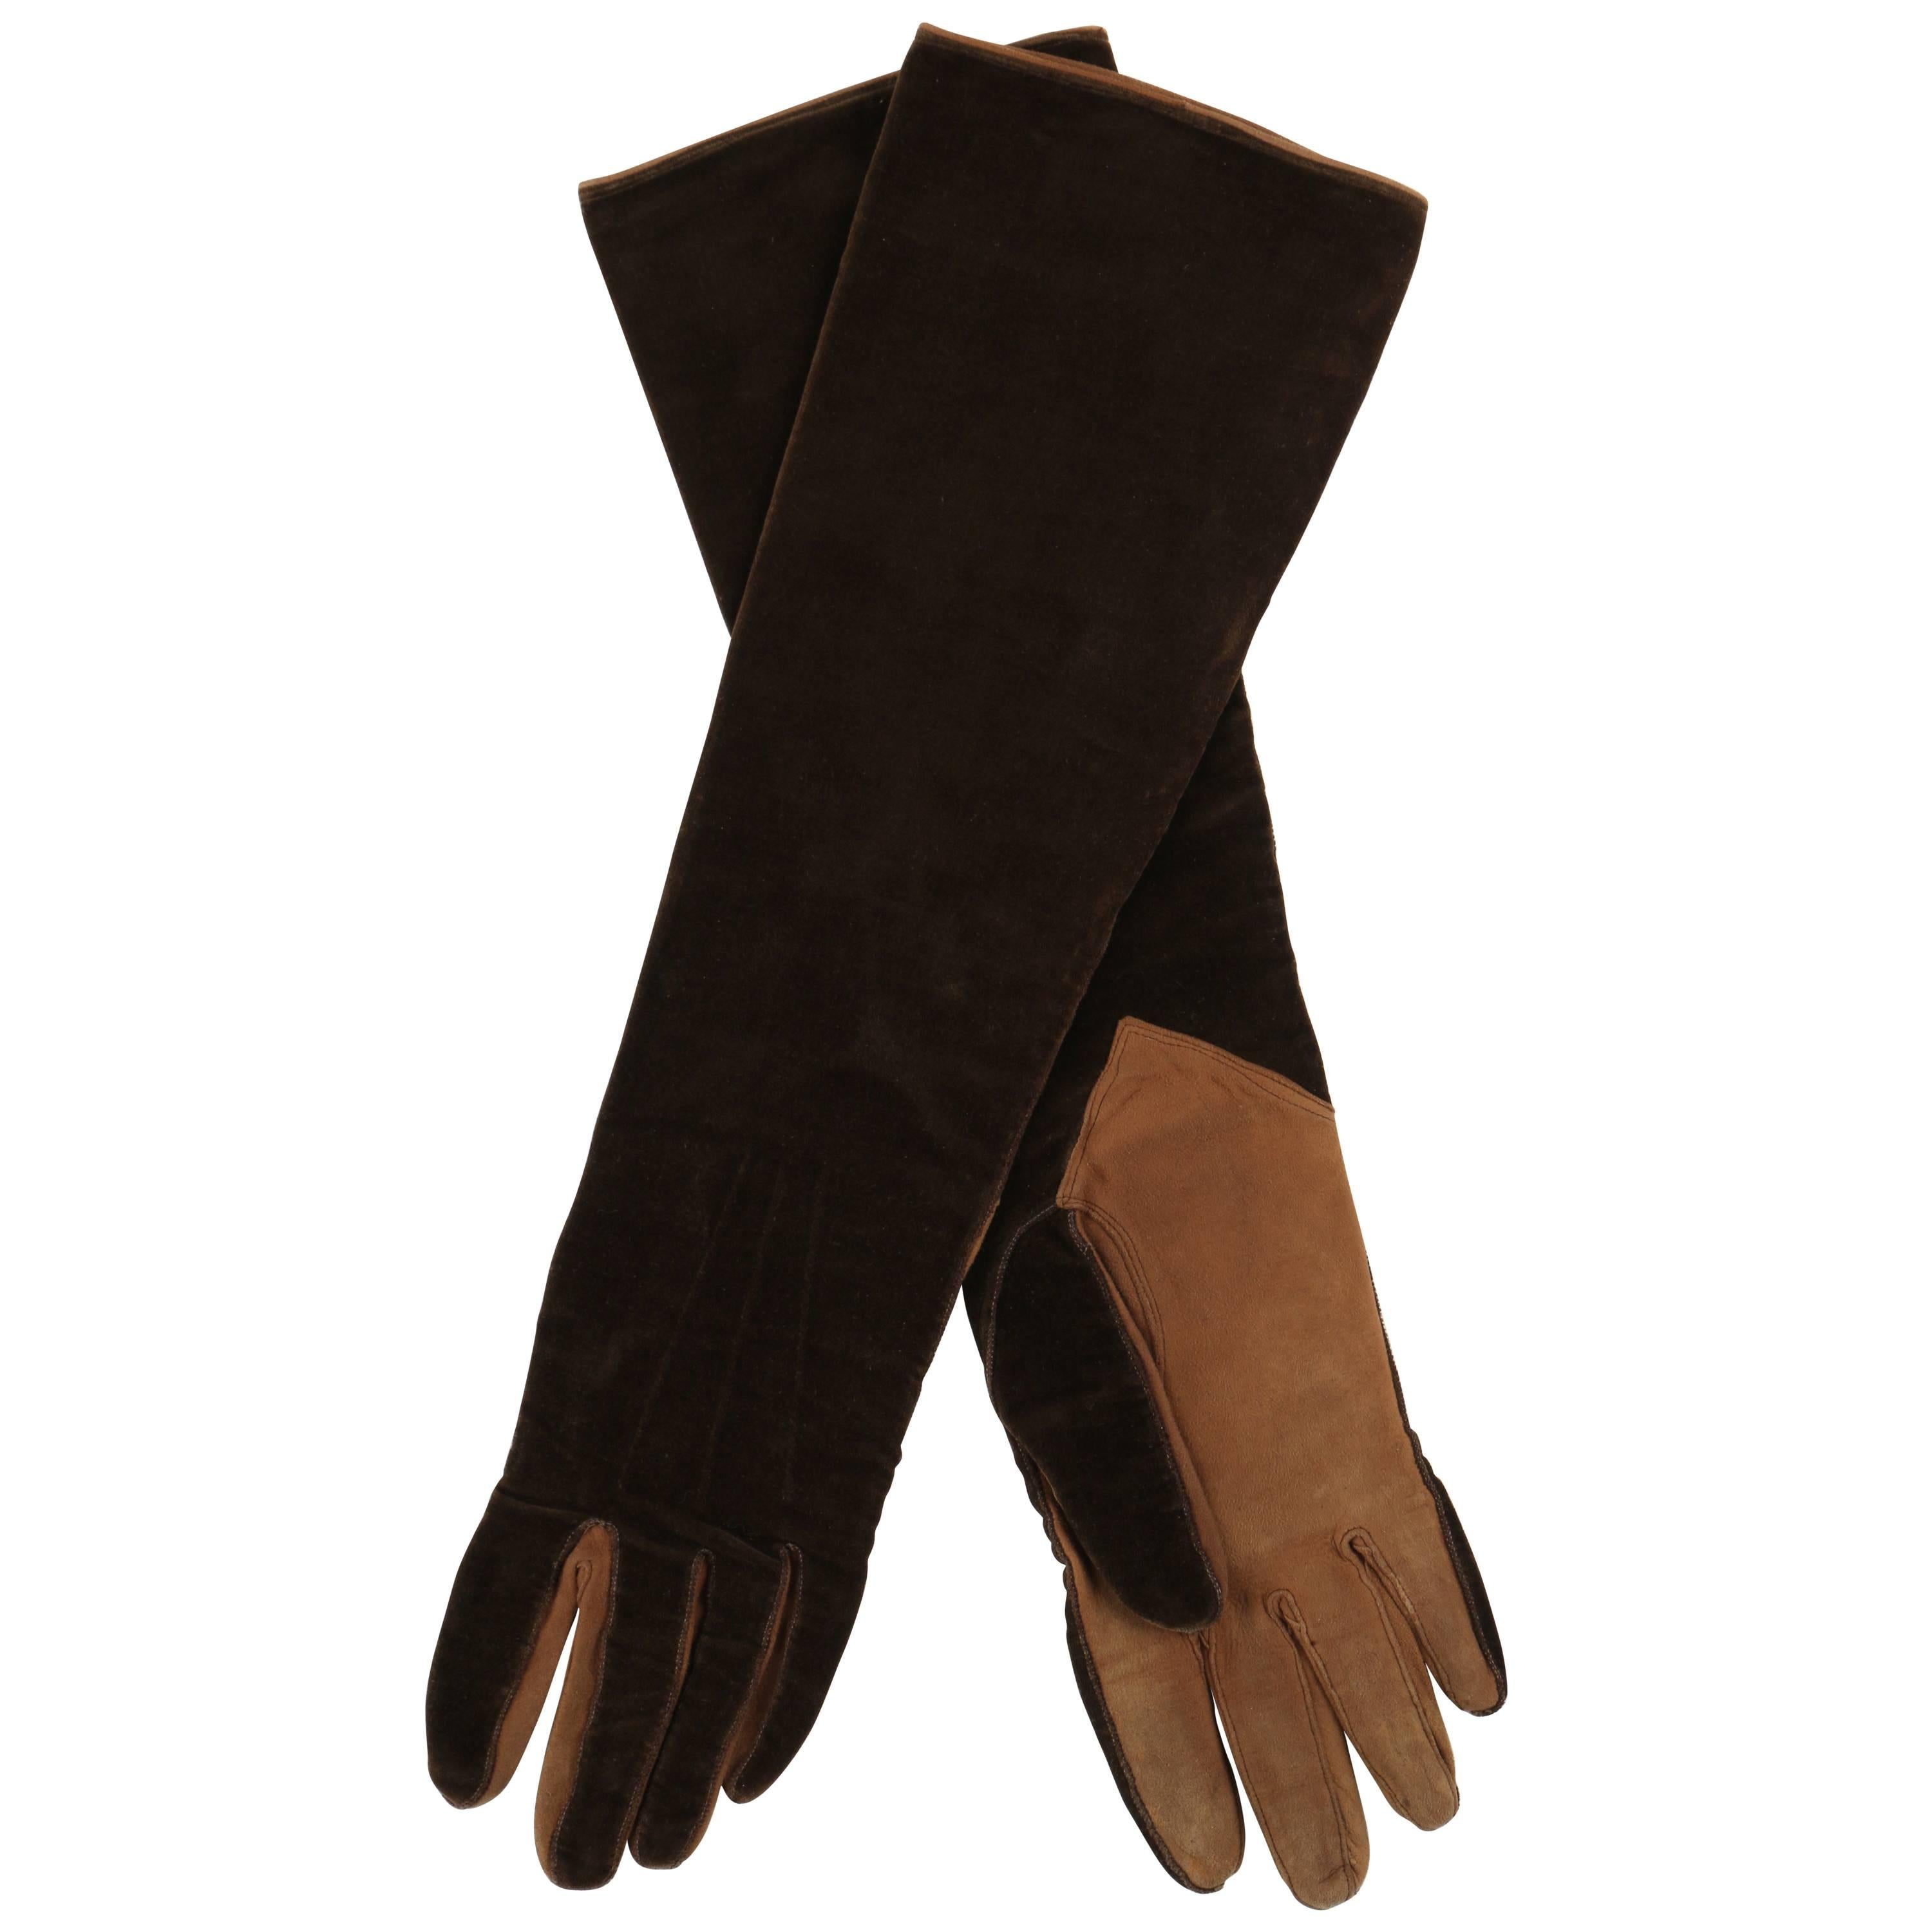 CHANEL 1930s Brown Velvet Suede Leather Elbow Length Flapper Gloves Size 7